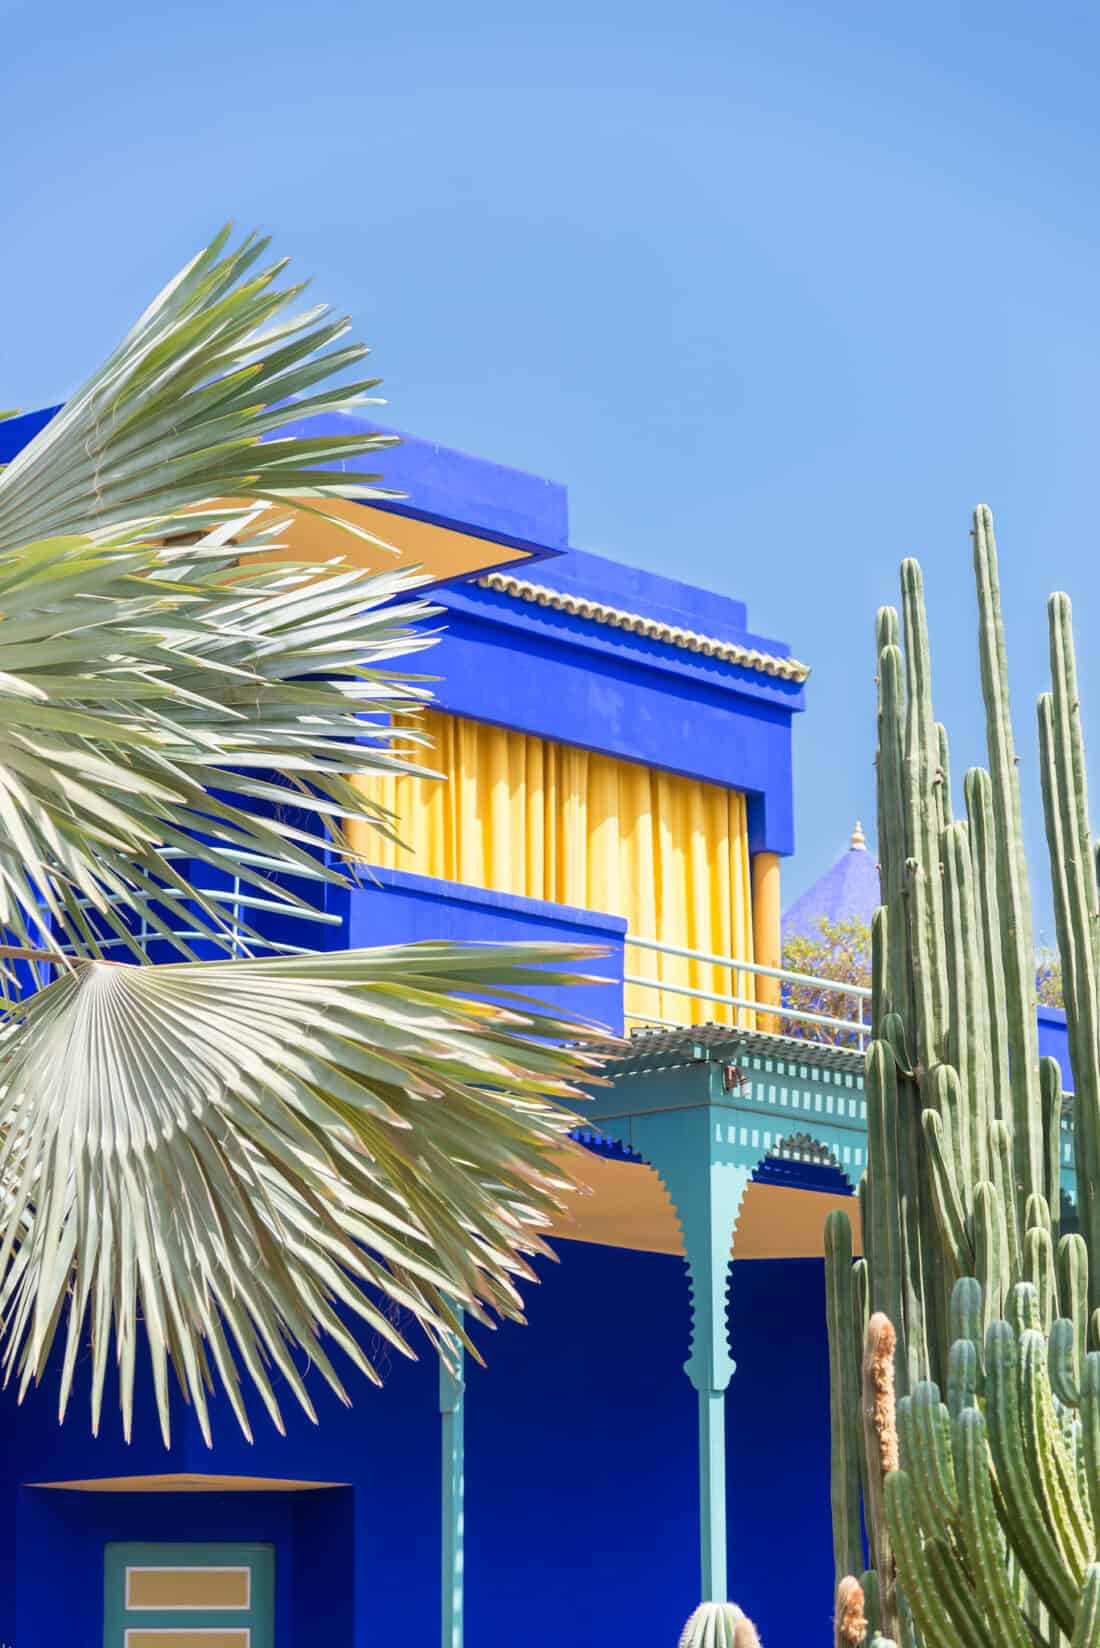 Vibrant blue building with yellow accents in Majorelle Garden behind palm leaves and cacti under a clear sky.